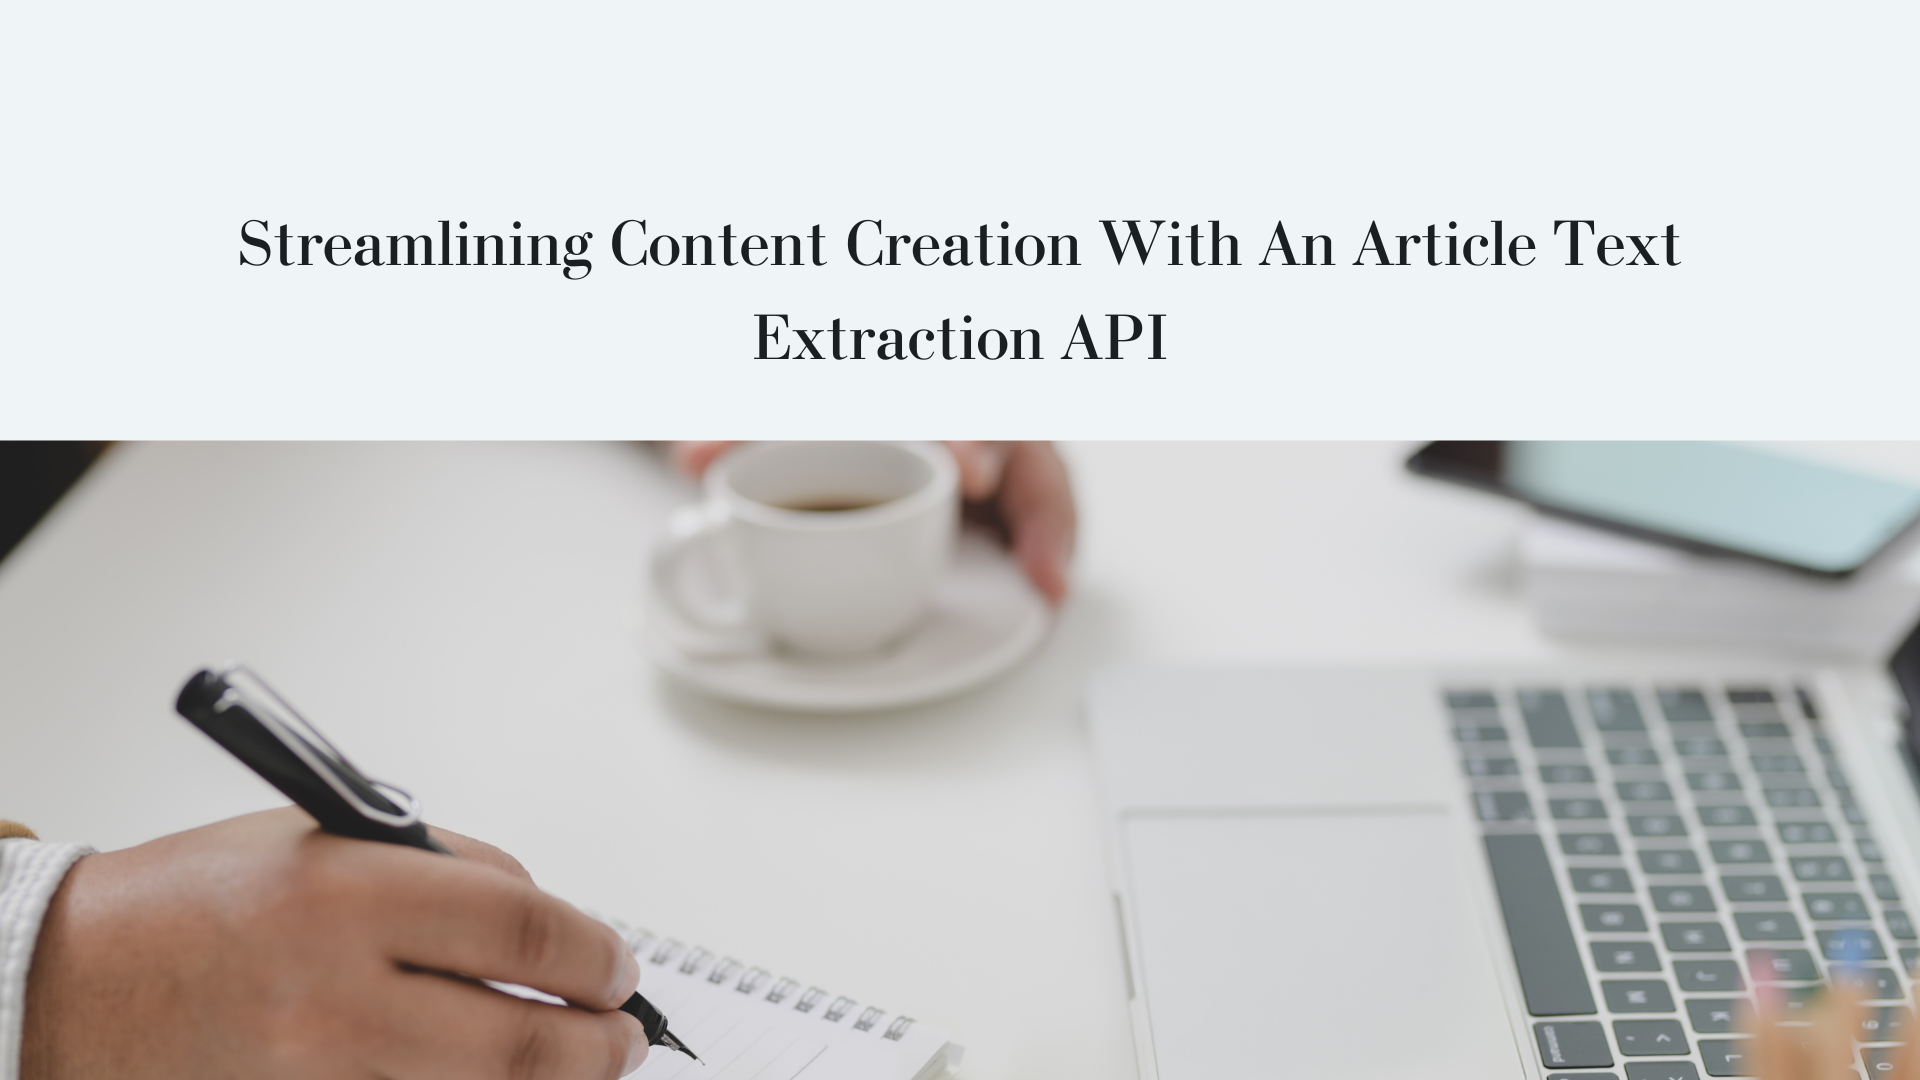 Streamlining Content Creation With An Article Text Extraction API